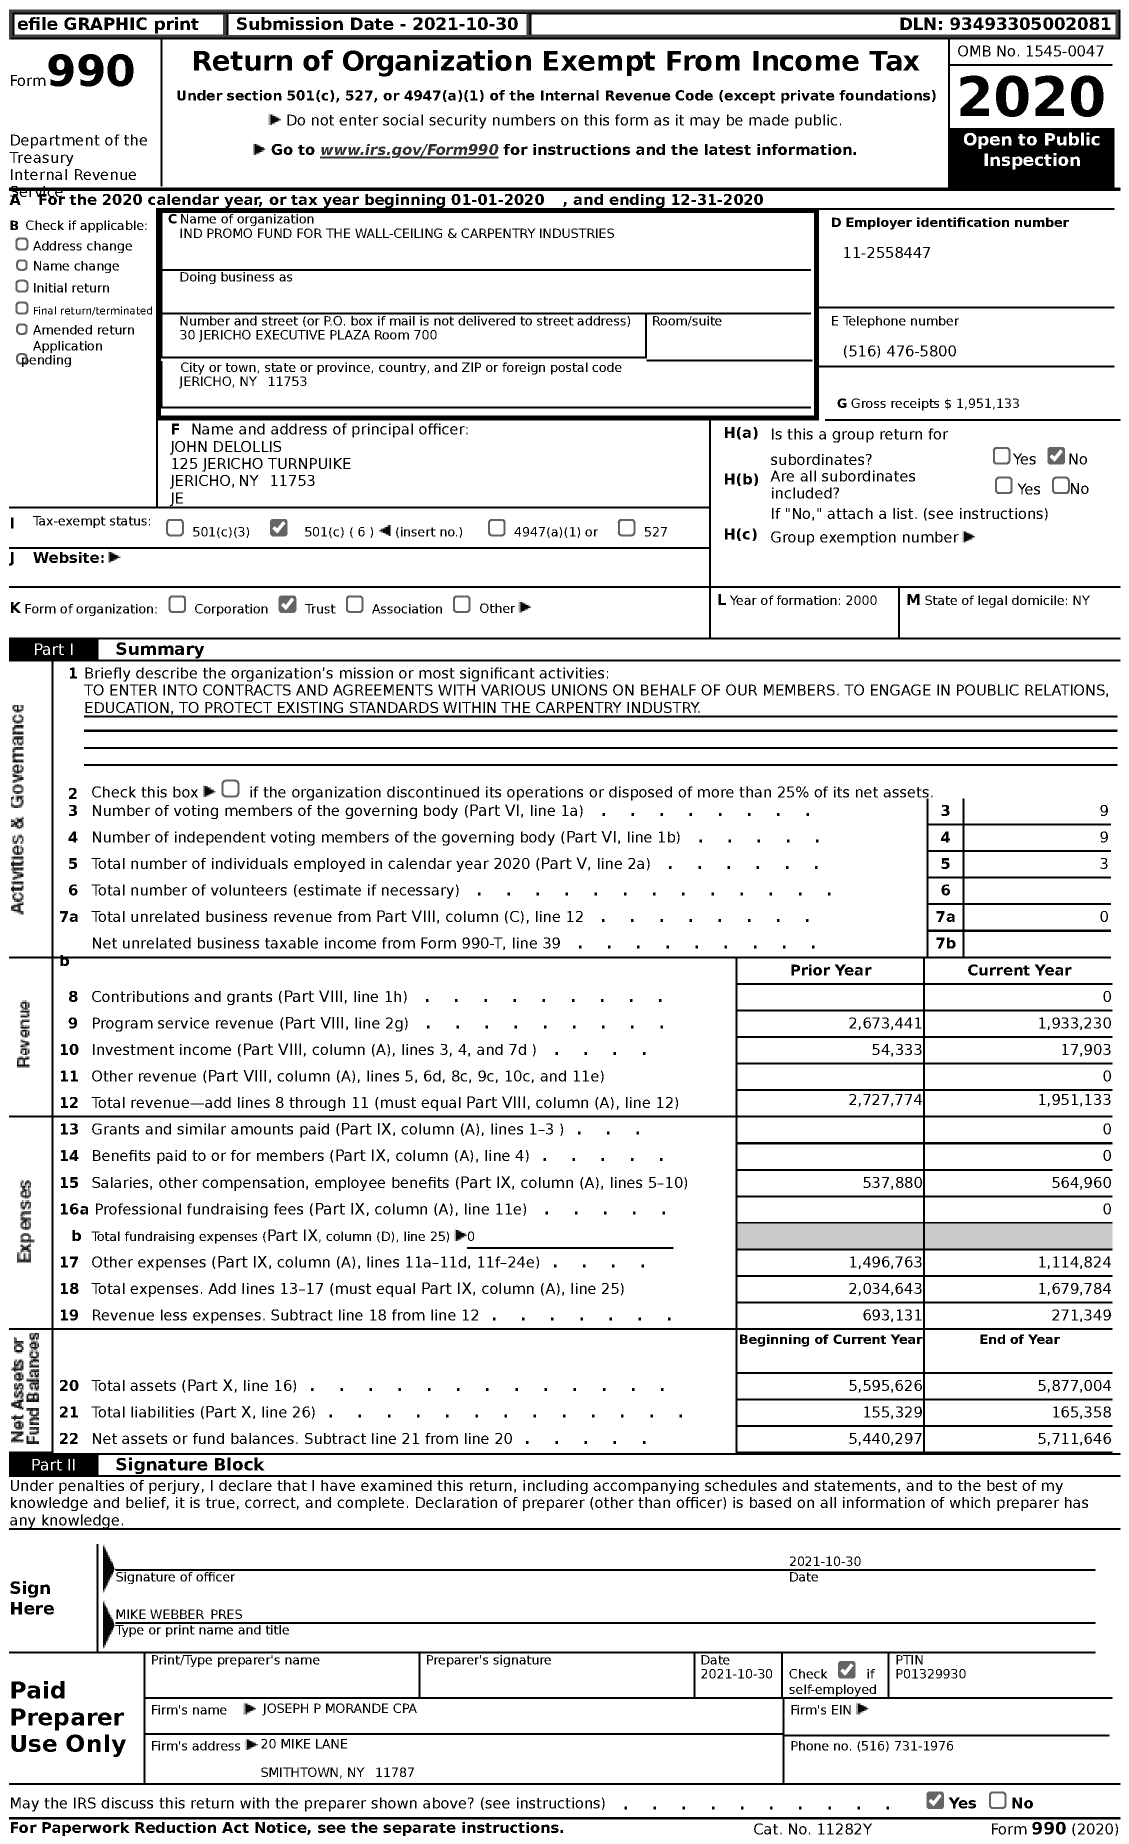 Image of first page of 2020 Form 990 for Industry Promotional Fund for the Wall Ceiling & Carpentry Industry